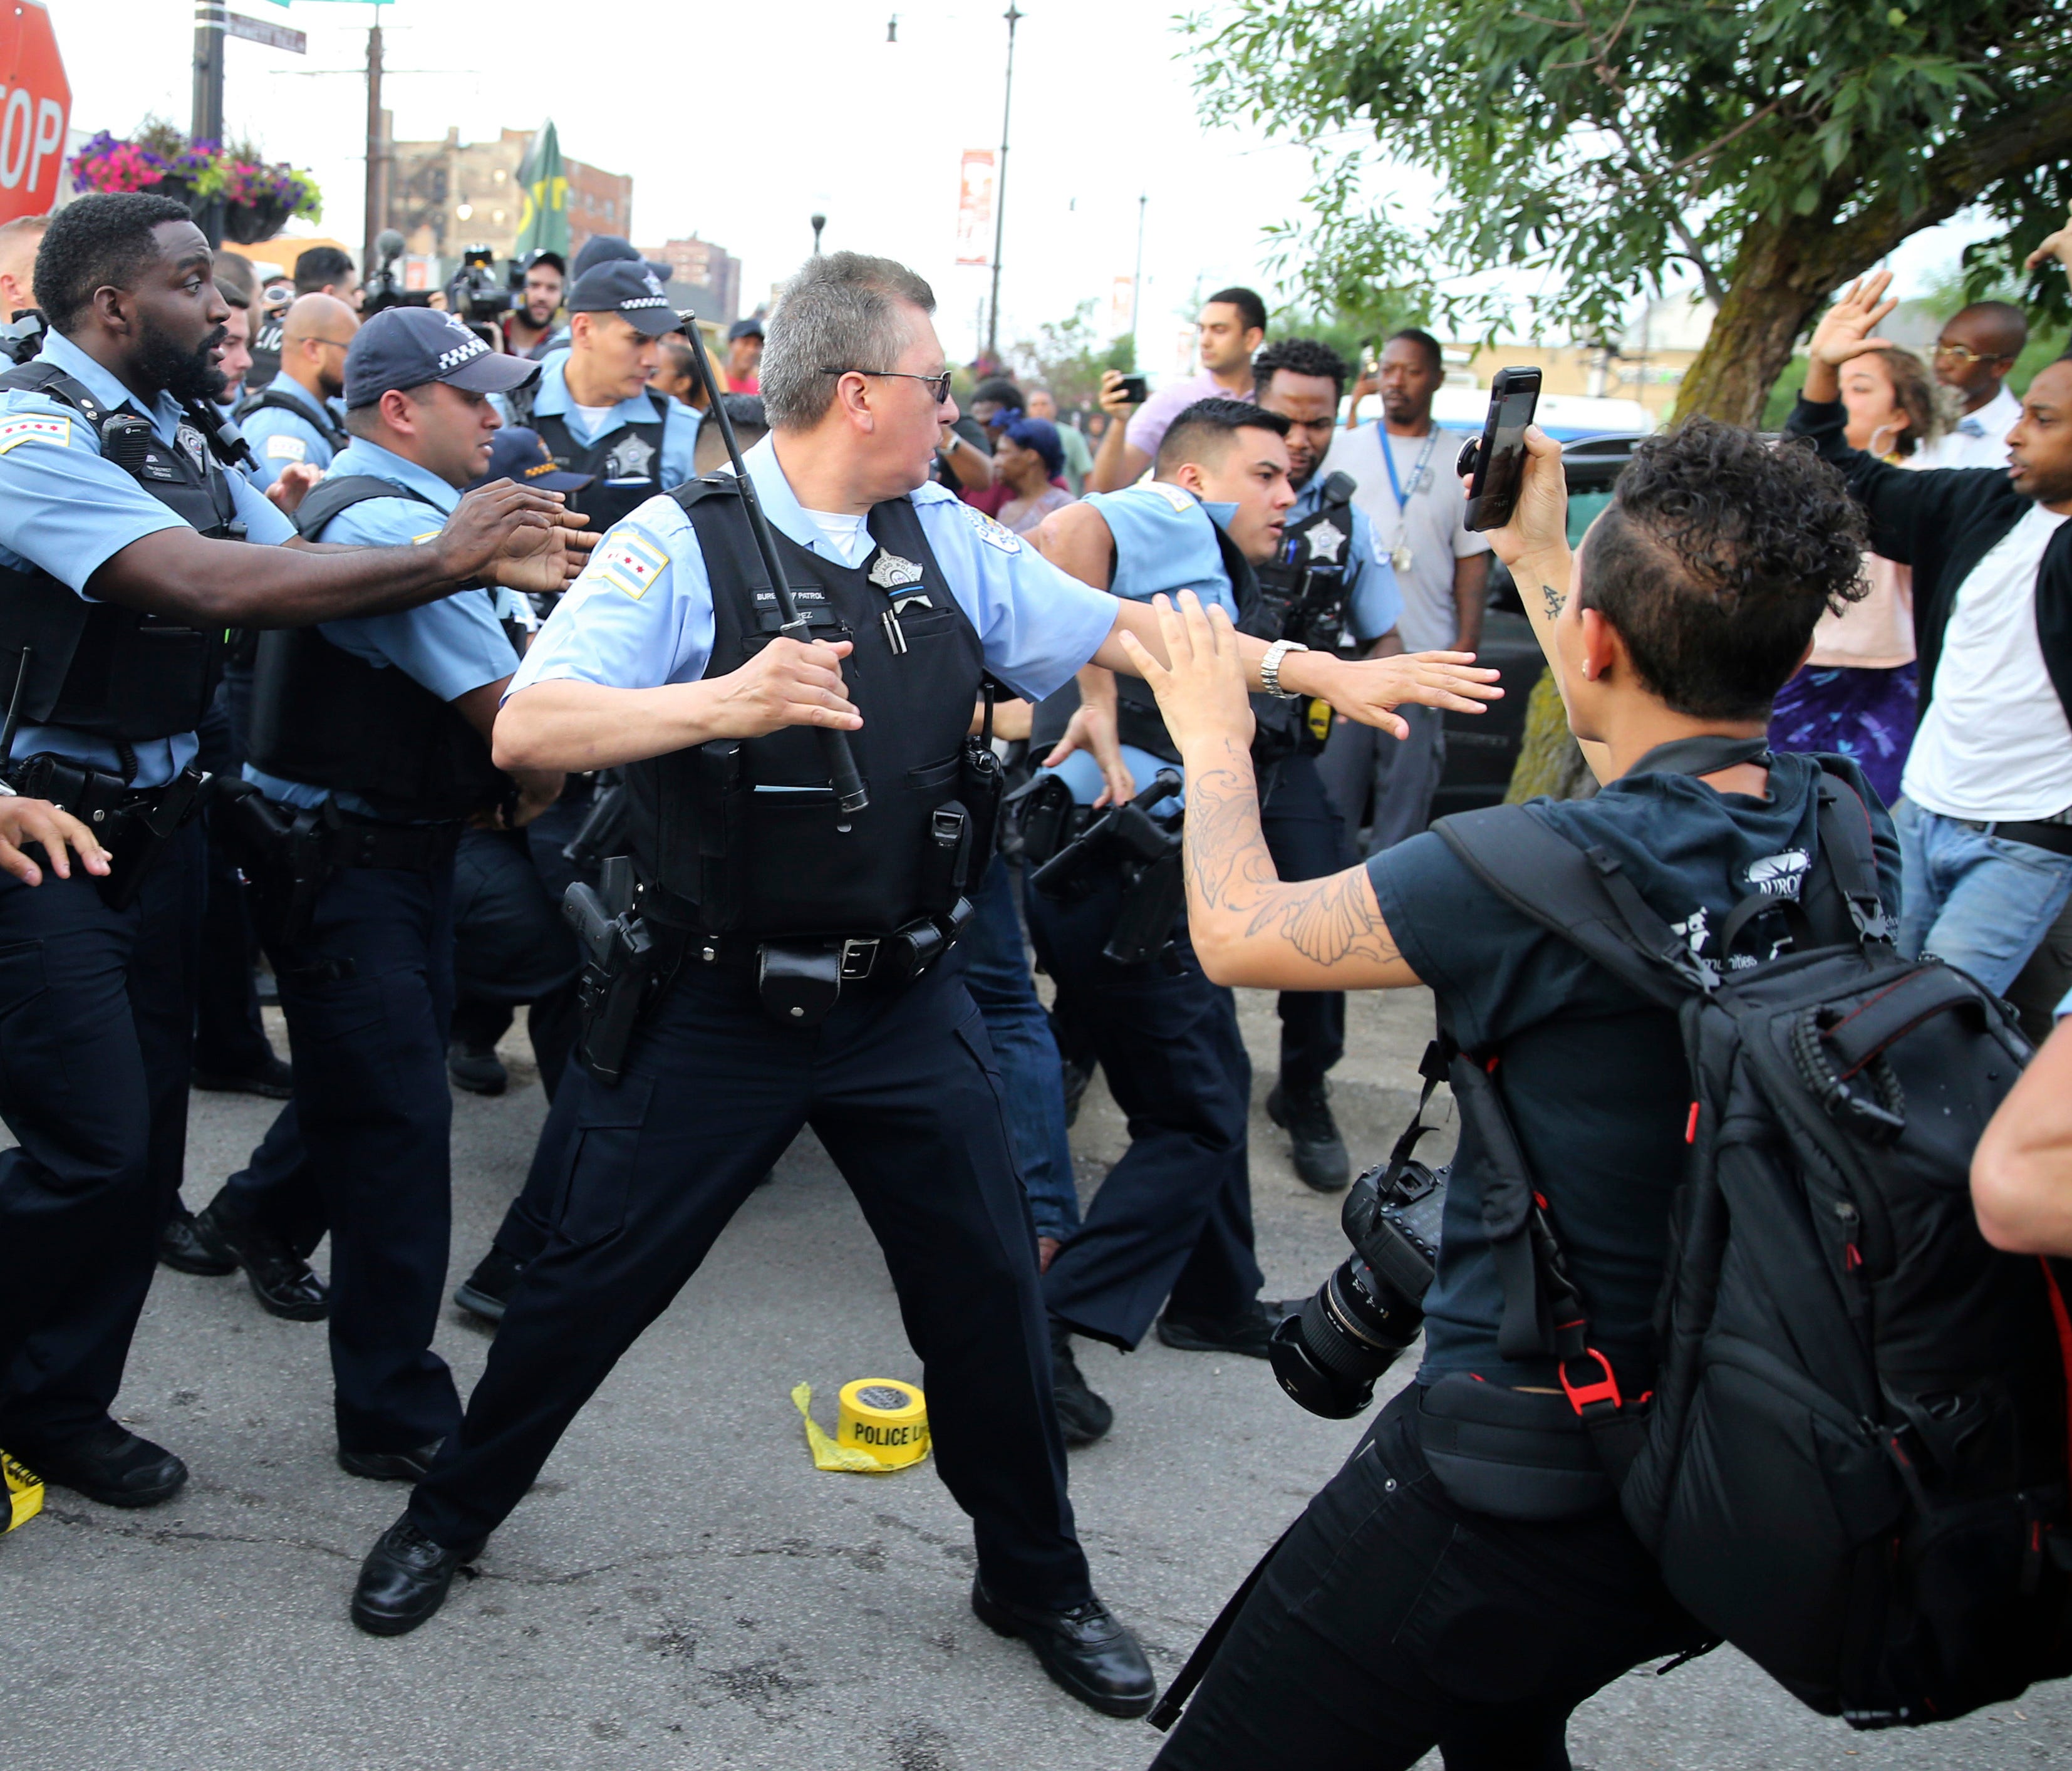 Members of the Chicago police department scuffle with an angry crowd at the scene of a police-involved shooting in Chicago, on Saturday, July 14, 2018.